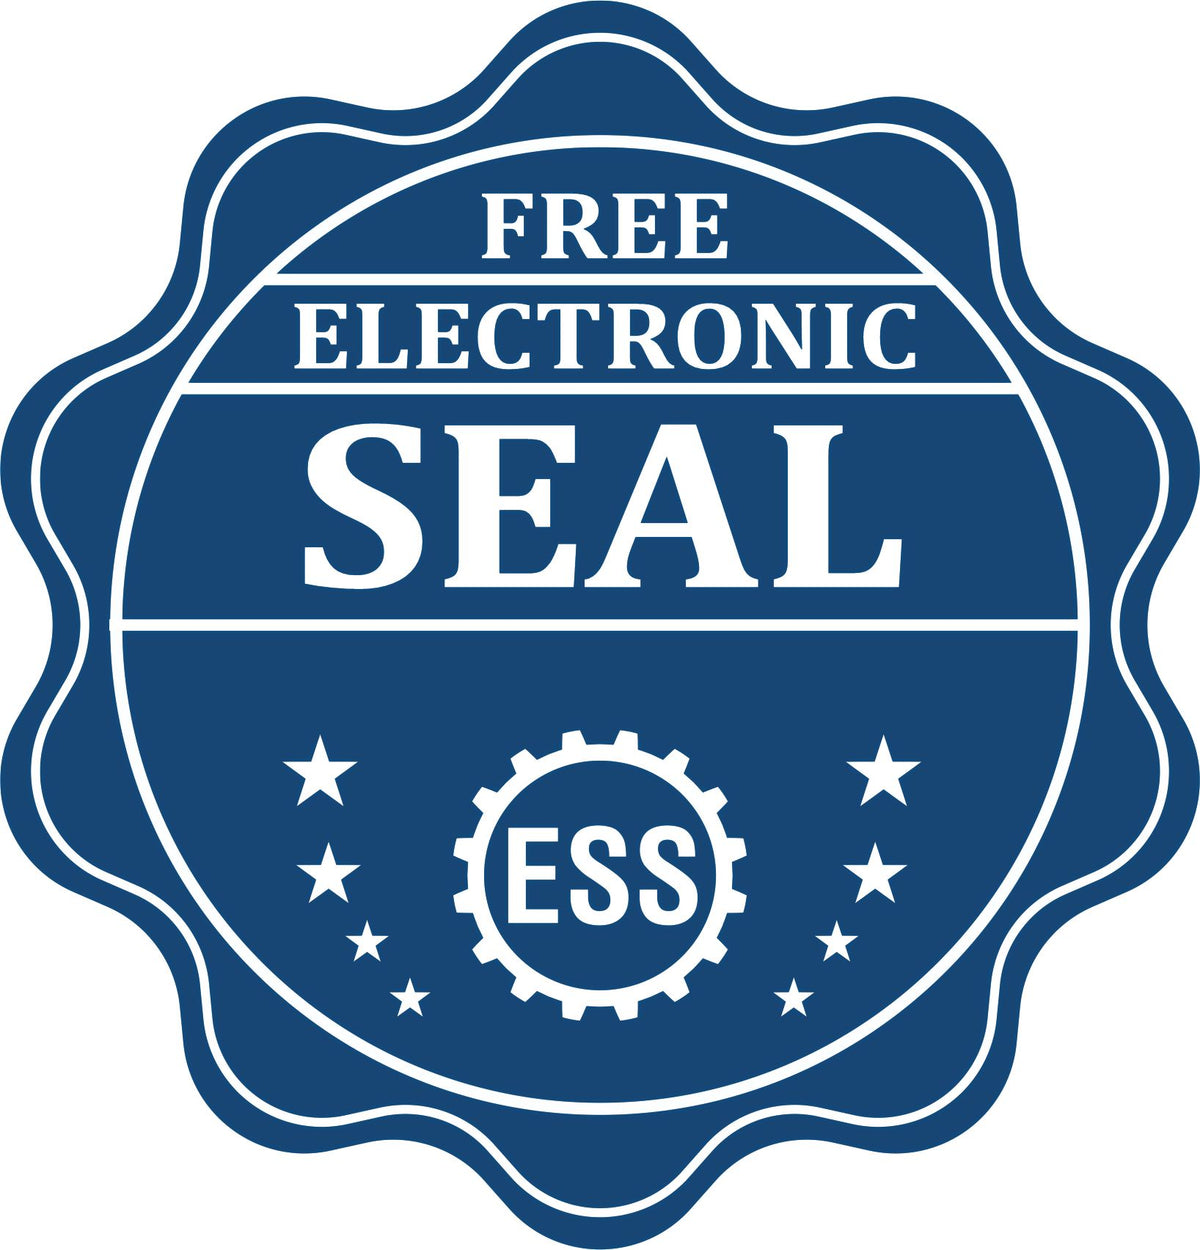 A badge showing a free electronic seal for the Gift Texas Engineer Seal with stars and the ESS gear on the emblem.